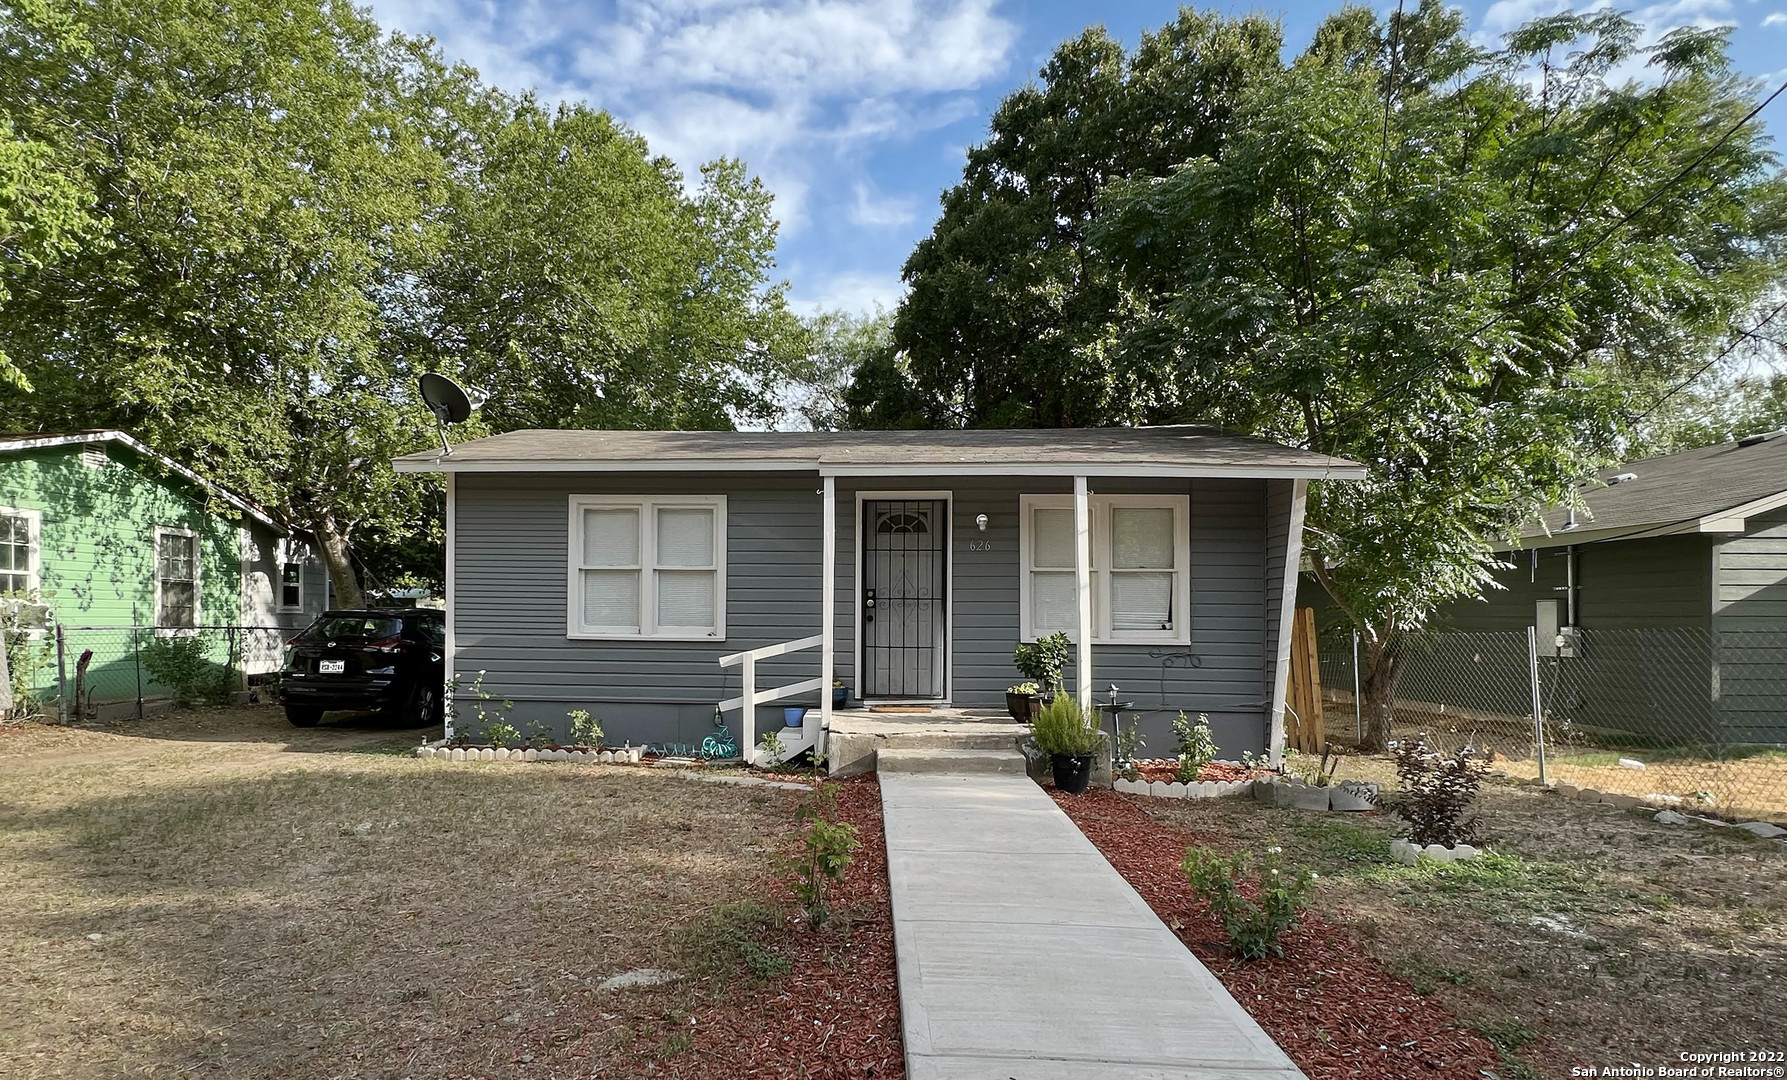 This the the perfect starter home!  Beautiful and cozy with a spacious backyard. Located near highways, downtown, and schools. Great opportunity to own a piece of San Antonio. Home was recently painted interior and exterior, new laminate flooring throughout and a new AC/Heat mini split. Move in ready!